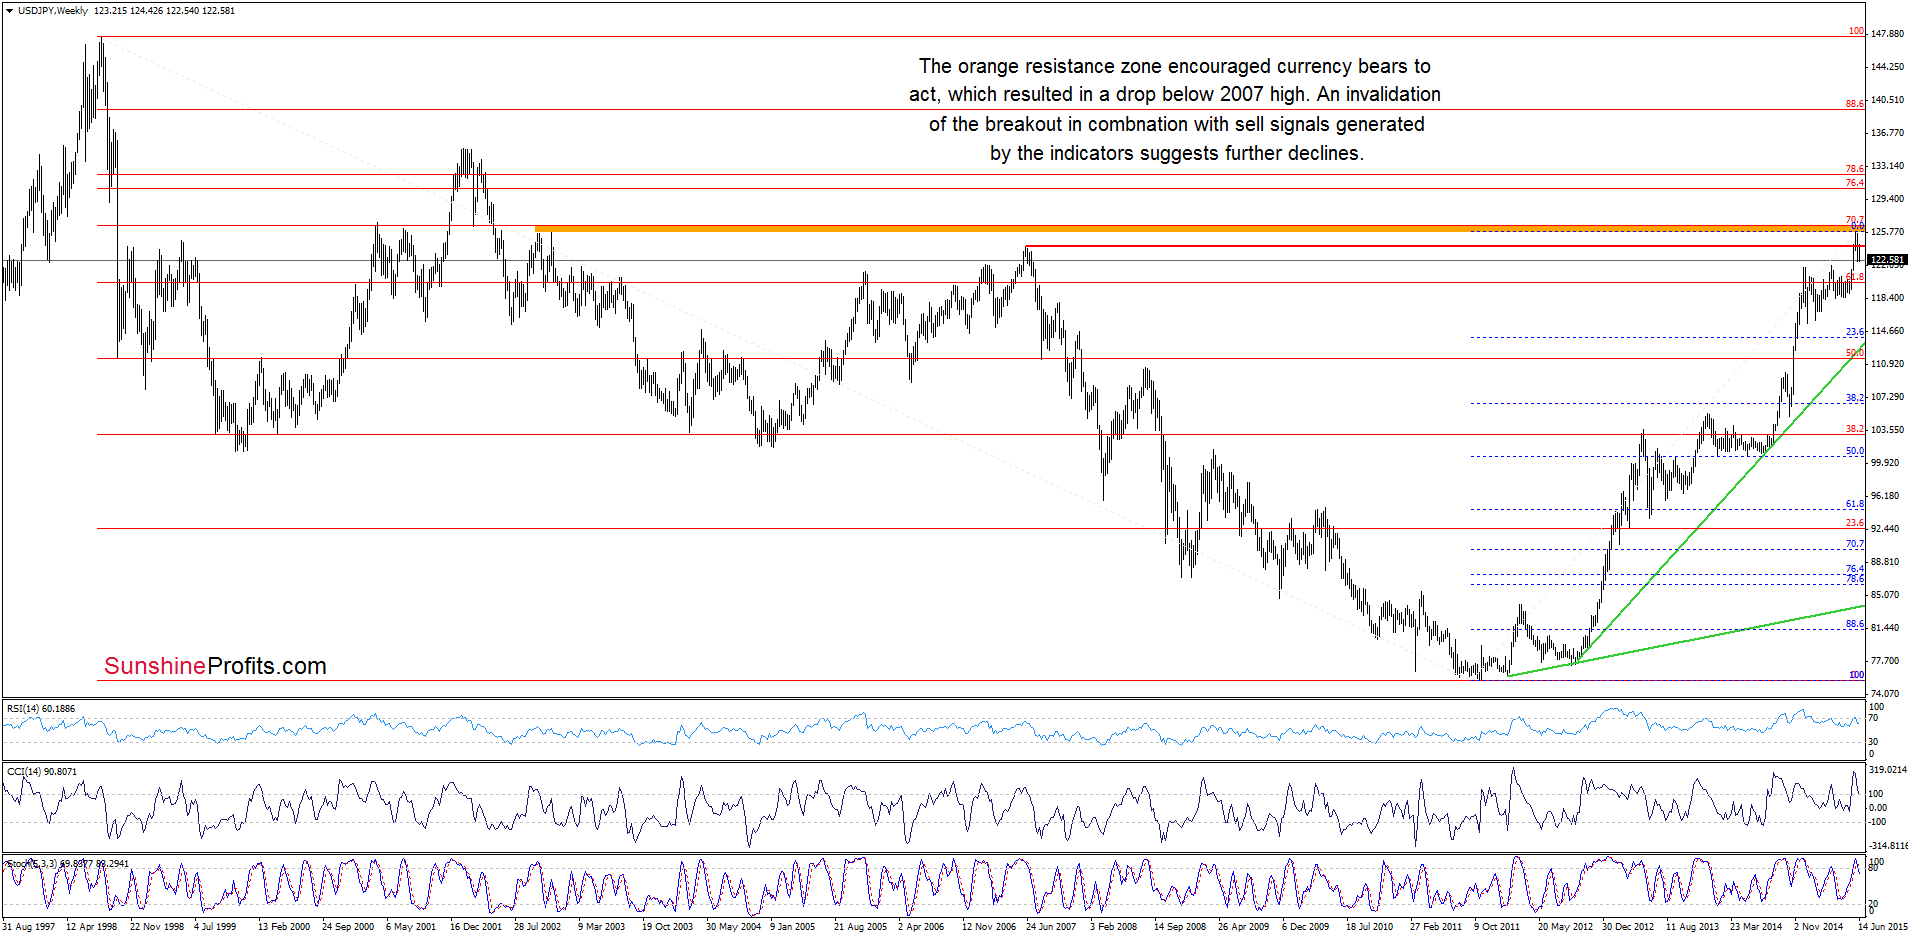 USD/JPY - the weekly chart